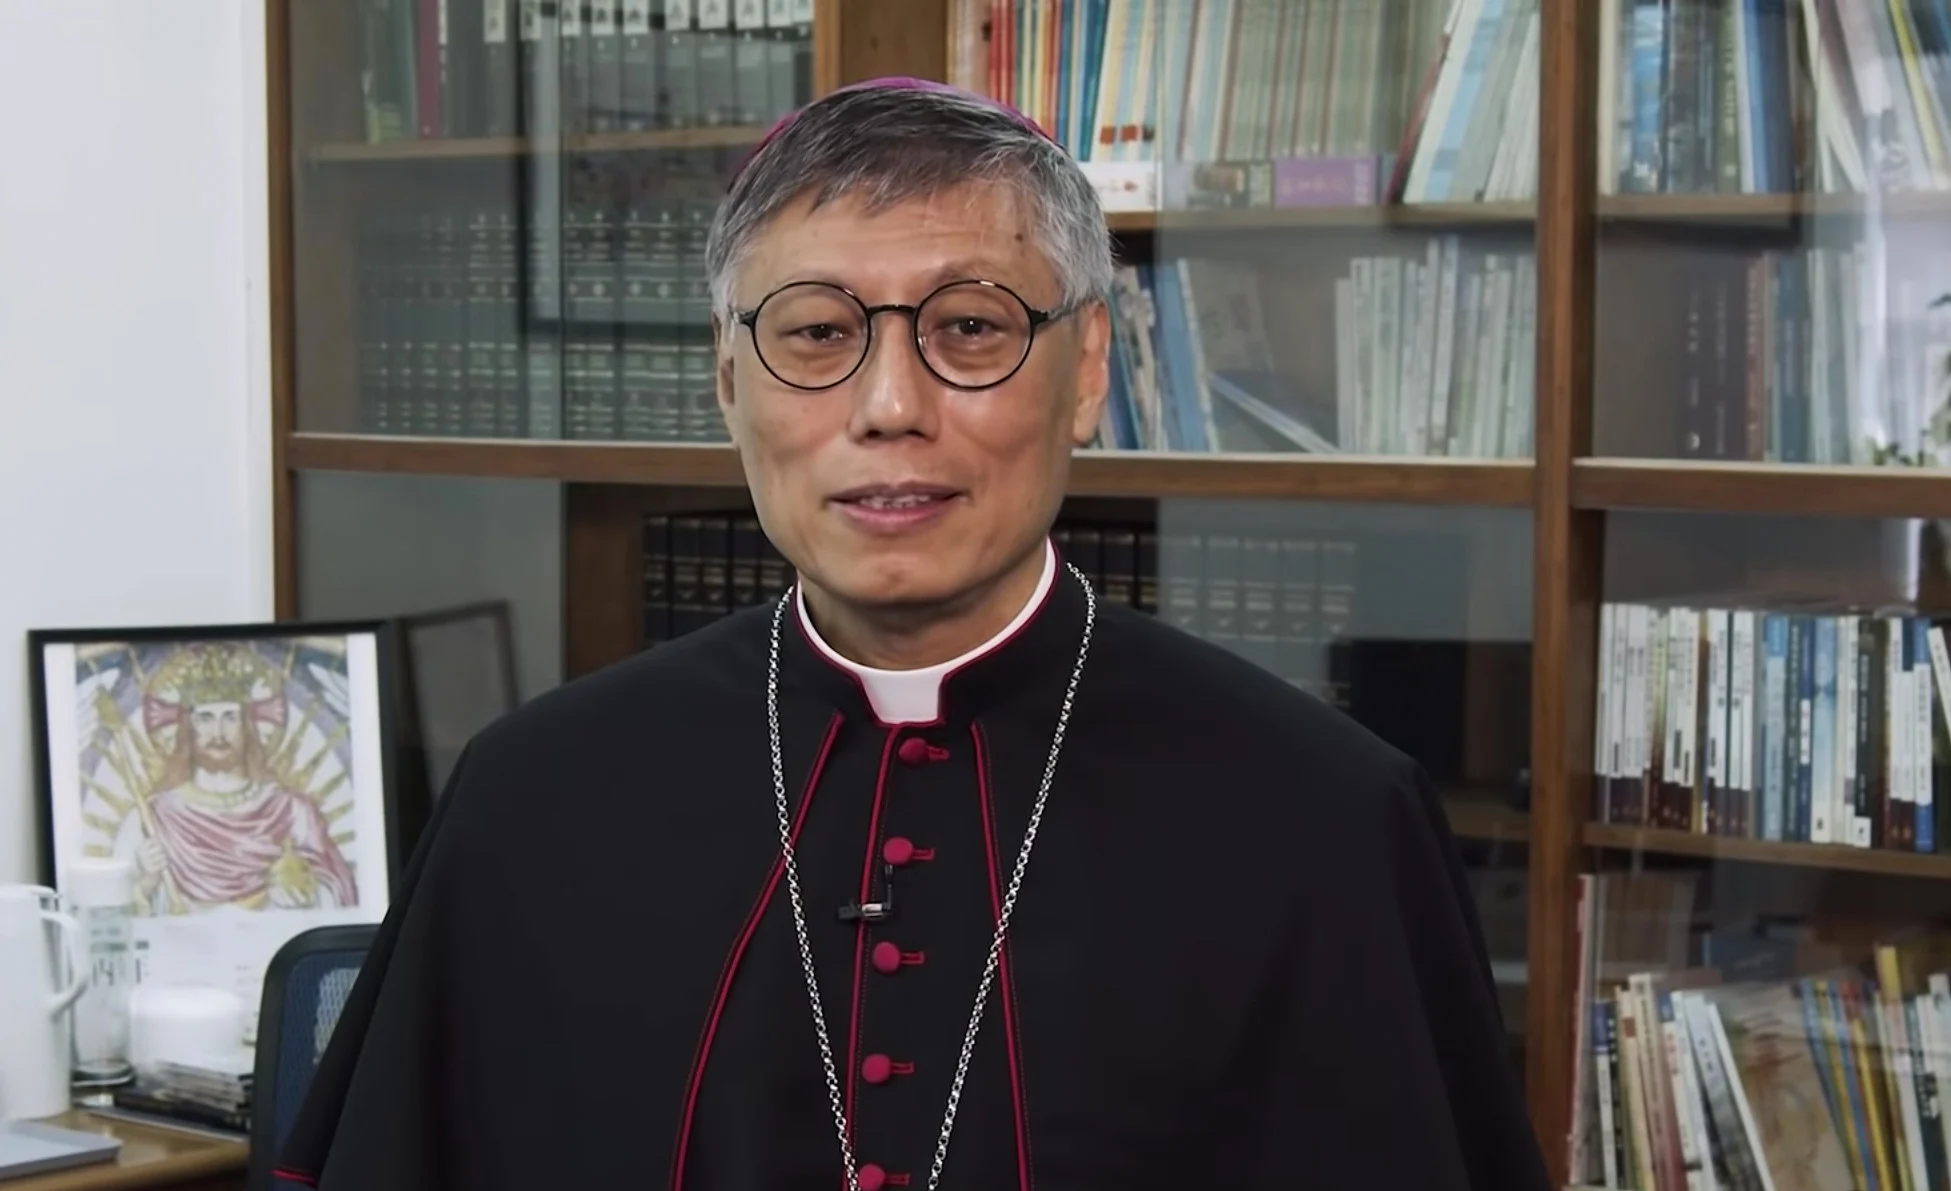 Bishop Stephen Chow, the head of Hong Kong’s Catholic diocese, has encouraged resident to embrace patriotism. Photo: Handout